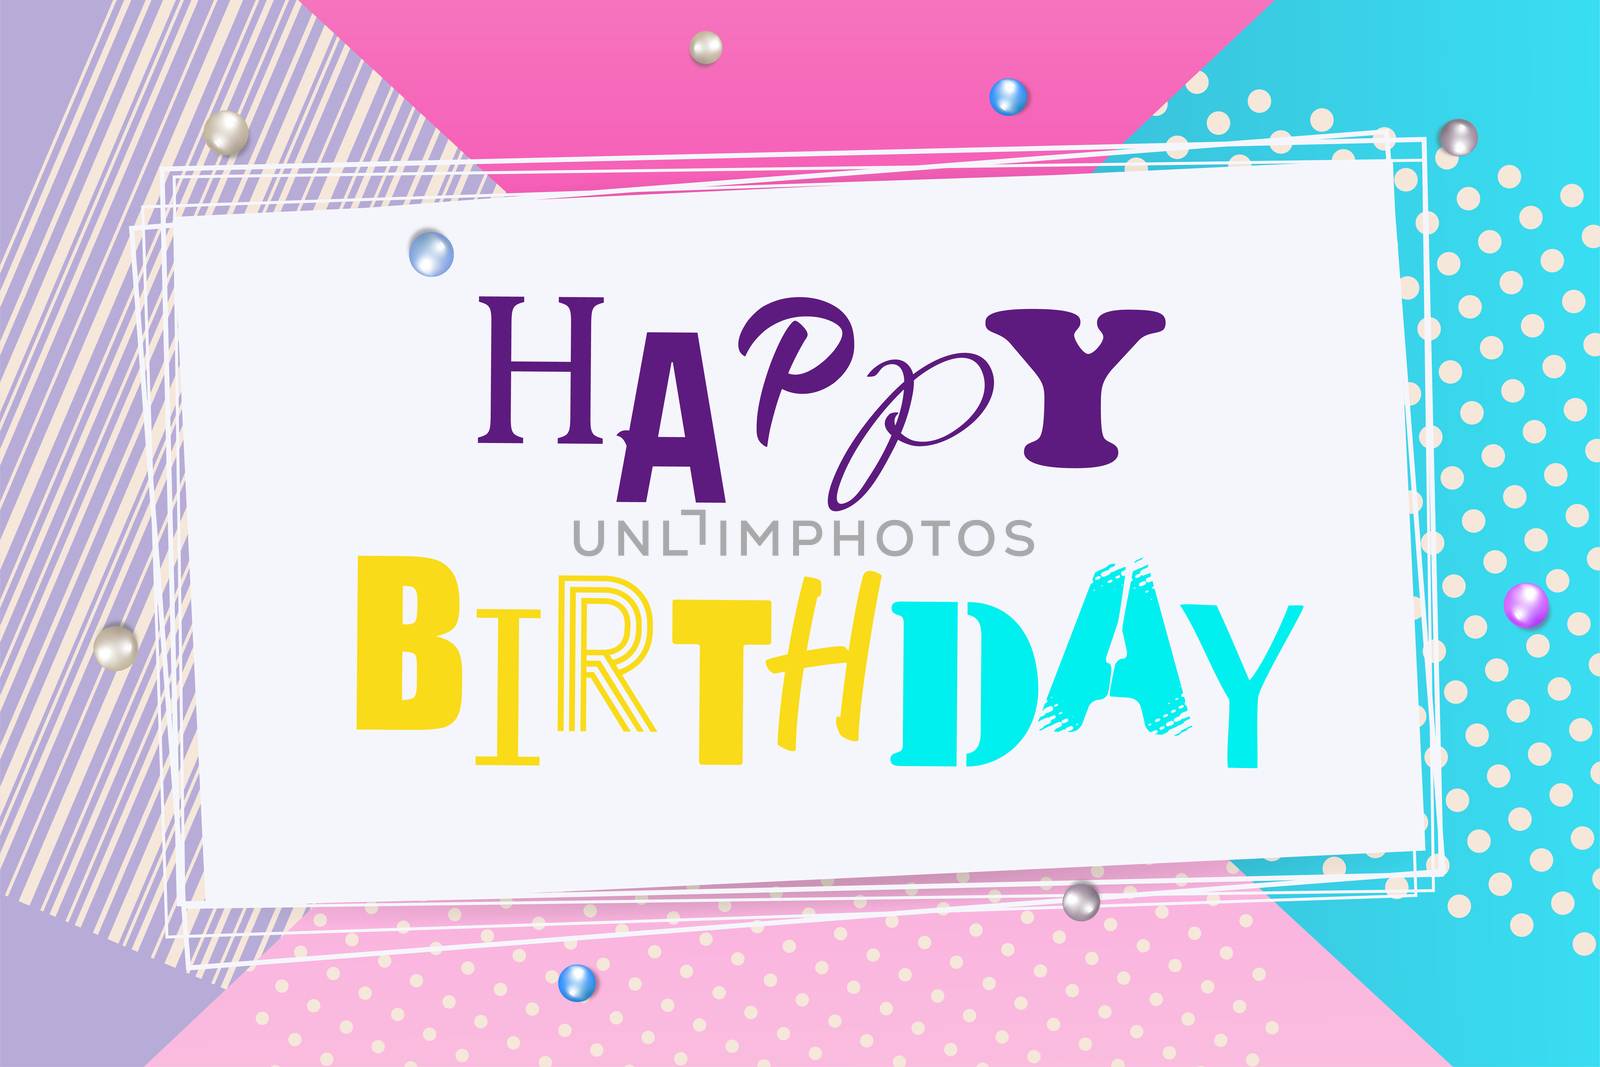 Happy birthday background Memphis style. Retro holiday backdrop 80s 90s pop art. Comic text lettering different font. Anniversary greeting poster. Halftone pattern vector illustration.